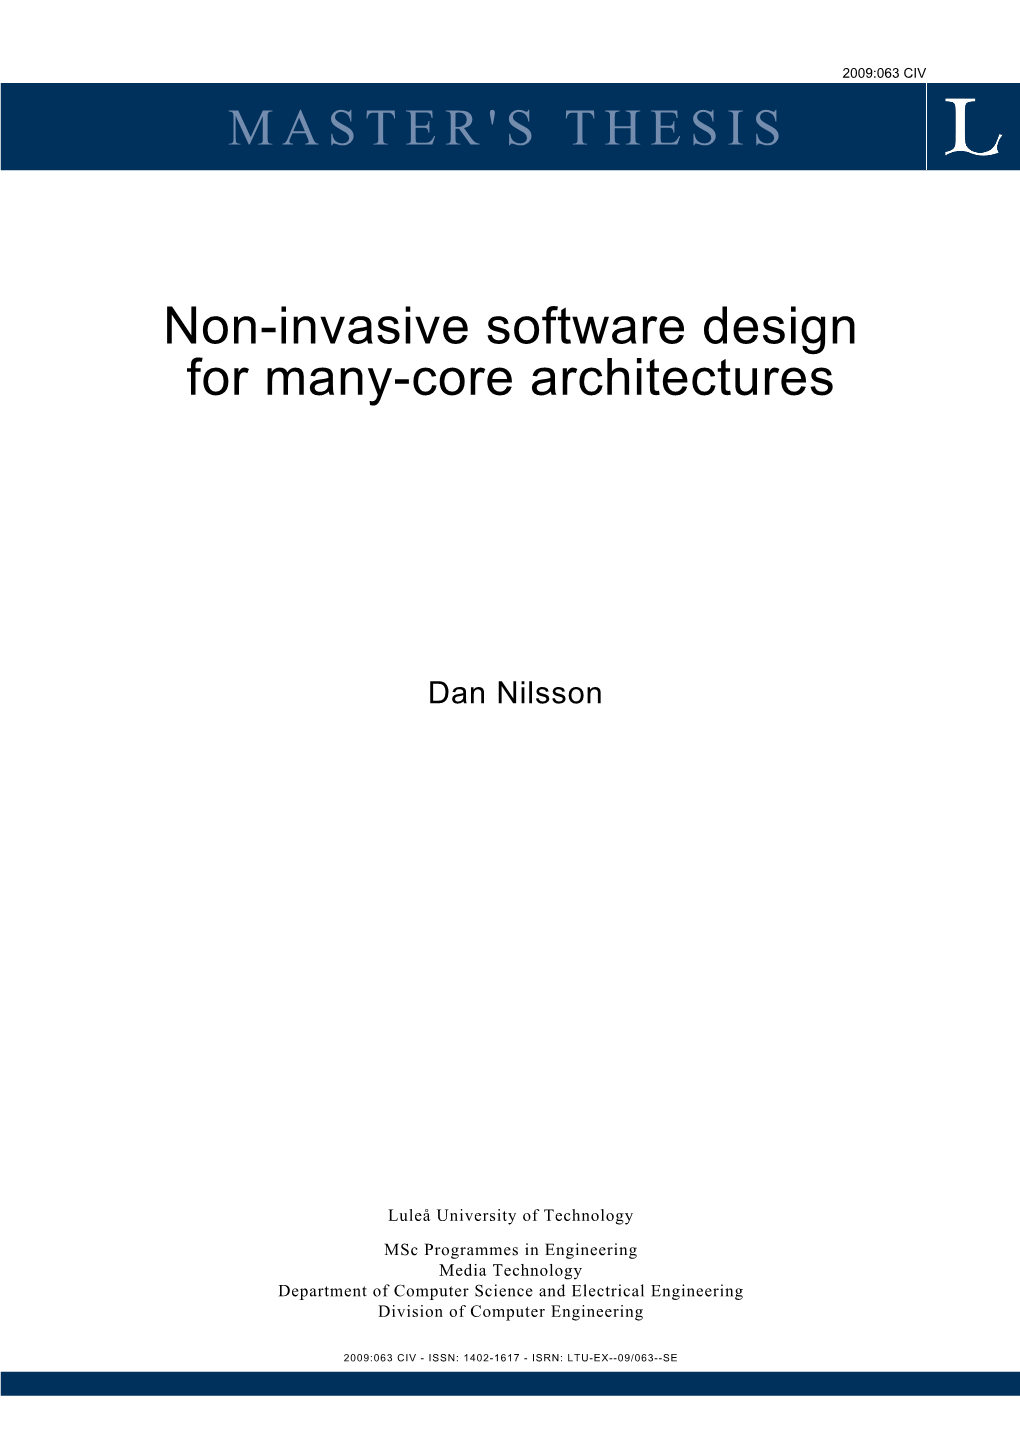 MASTER's THESIS Non-Invasive Software Design for Many-Core